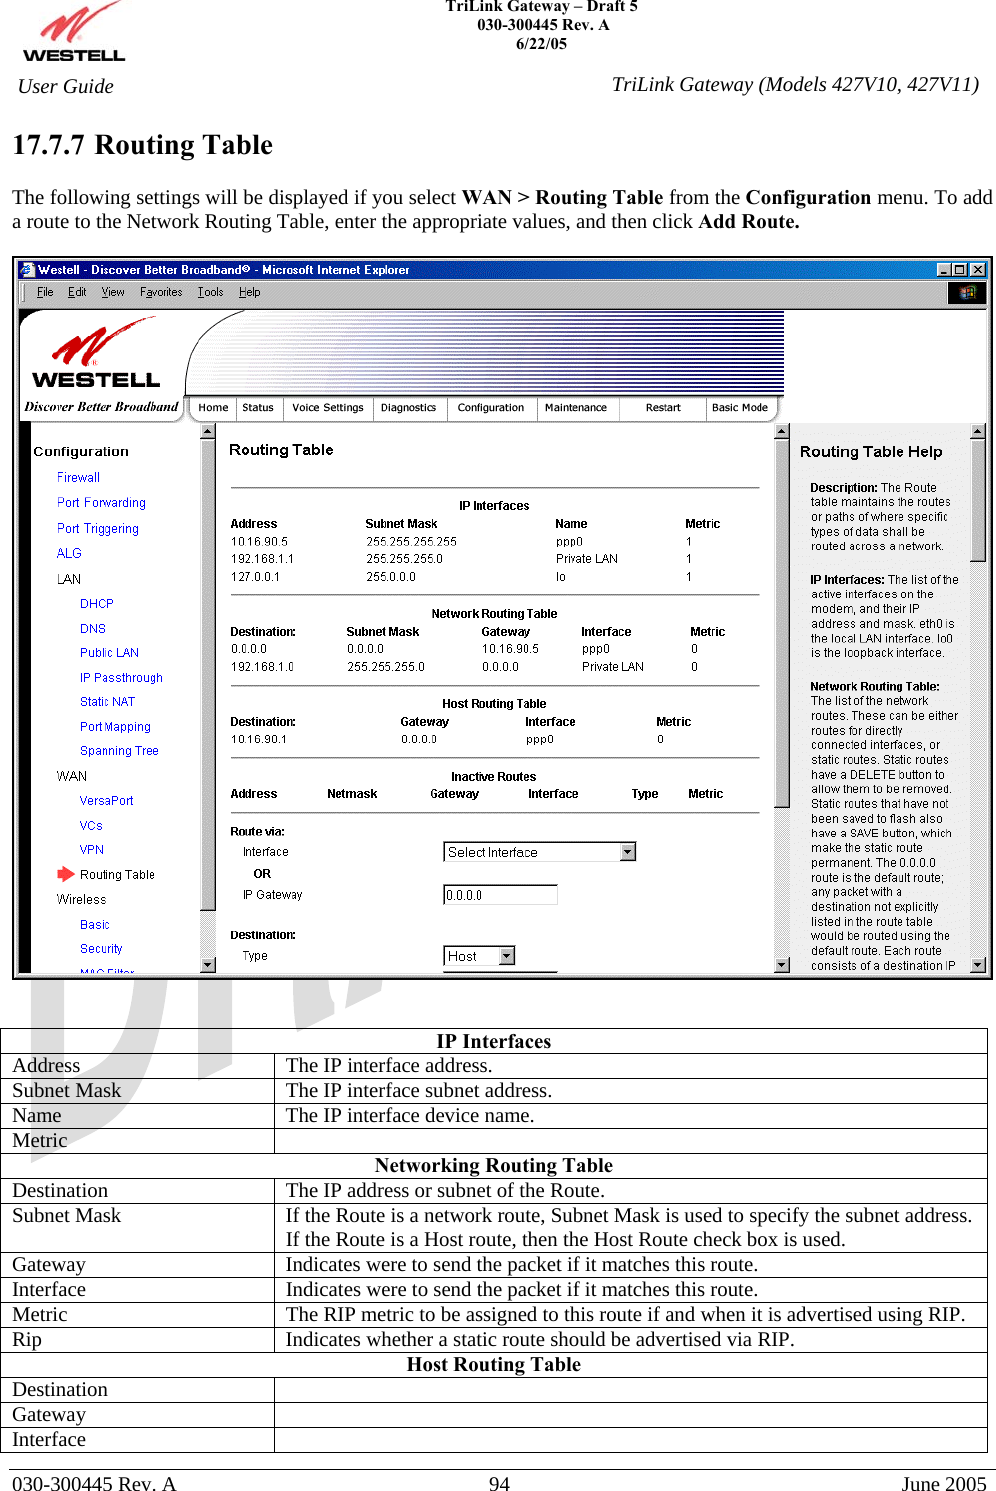    TriLink Gateway – Draft 5   030-300445 Rev. A 6/22/05   030-300445 Rev. A  94  June 2005  User Guide  TriLink Gateway (Models 427V10, 427V11)17.7.7  Routing Table  The following settings will be displayed if you select WAN &gt; Routing Table from the Configuration menu. To add a route to the Network Routing Table, enter the appropriate values, and then click Add Route.     IP Interfaces Address  The IP interface address. Subnet Mask  The IP interface subnet address. Name  The IP interface device name. Metric  Networking Routing Table Destination  The IP address or subnet of the Route. Subnet Mask  If the Route is a network route, Subnet Mask is used to specify the subnet address. If the Route is a Host route, then the Host Route check box is used. Gateway  Indicates were to send the packet if it matches this route. Interface  Indicates were to send the packet if it matches this route. Metric  The RIP metric to be assigned to this route if and when it is advertised using RIP. Rip  Indicates whether a static route should be advertised via RIP. Host Routing Table Destination  Gateway  Interface  